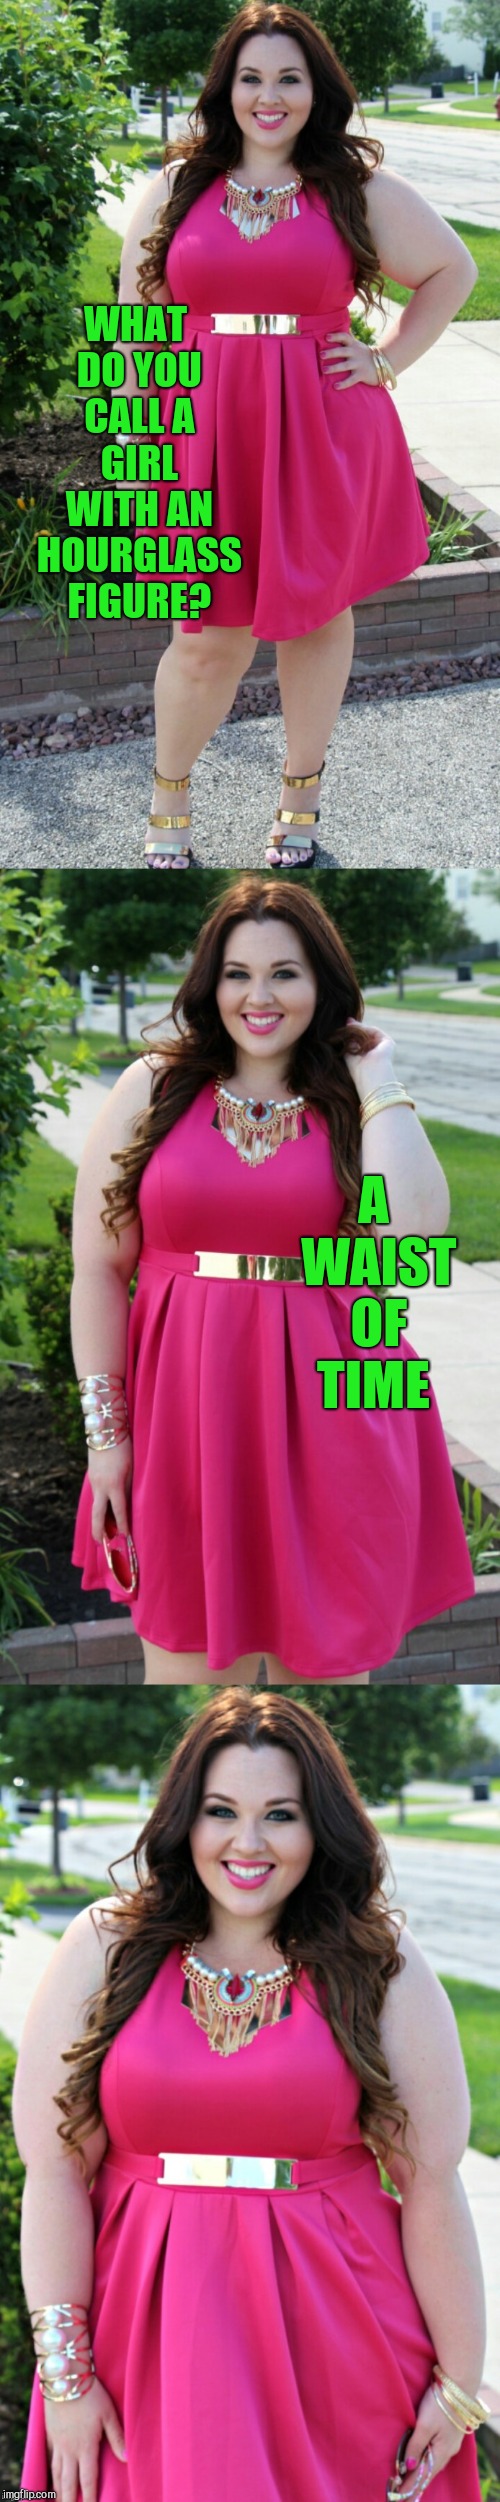 Sarah Rae Vargas joke template | WHAT DO YOU CALL A GIRL WITH AN HOURGLASS FIGURE? A WAIST OF TIME | image tagged in sarah rae vargas joke template 1,sarah rae vargas,jbmemegeek,bad puns,bad jokes | made w/ Imgflip meme maker